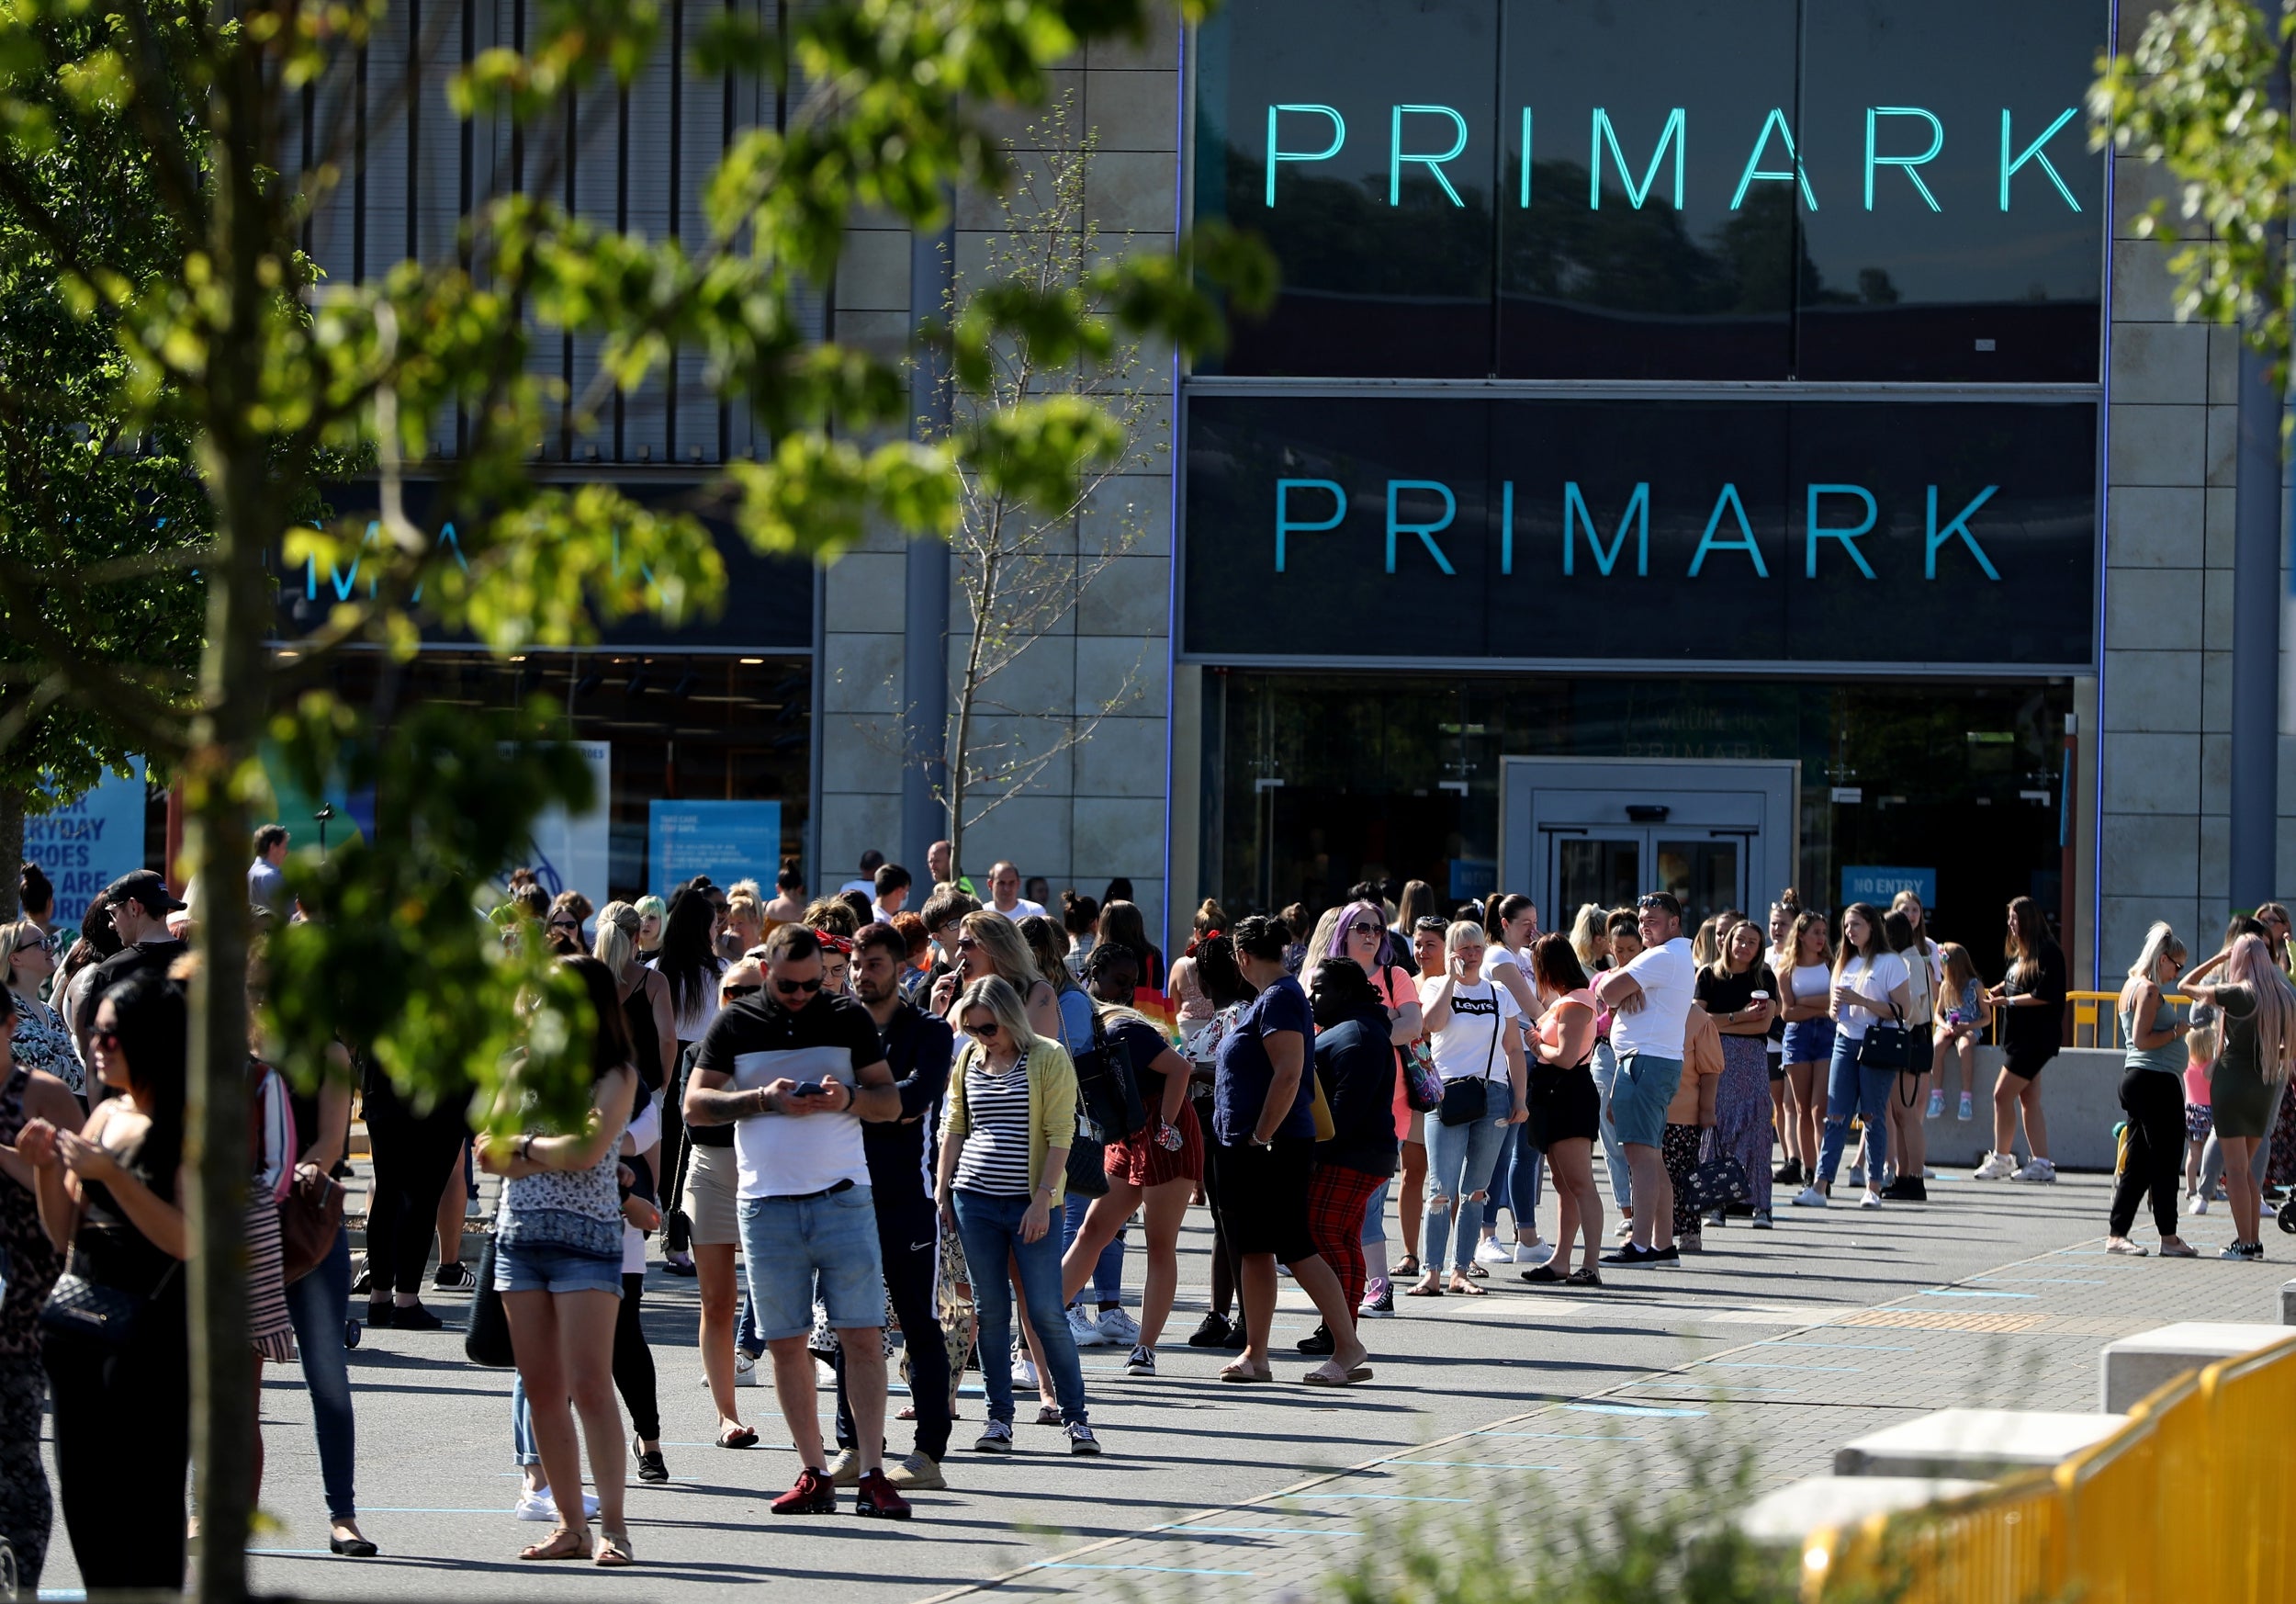 Shoppers queue up outside Primark, which didn’t need offers to tempt them